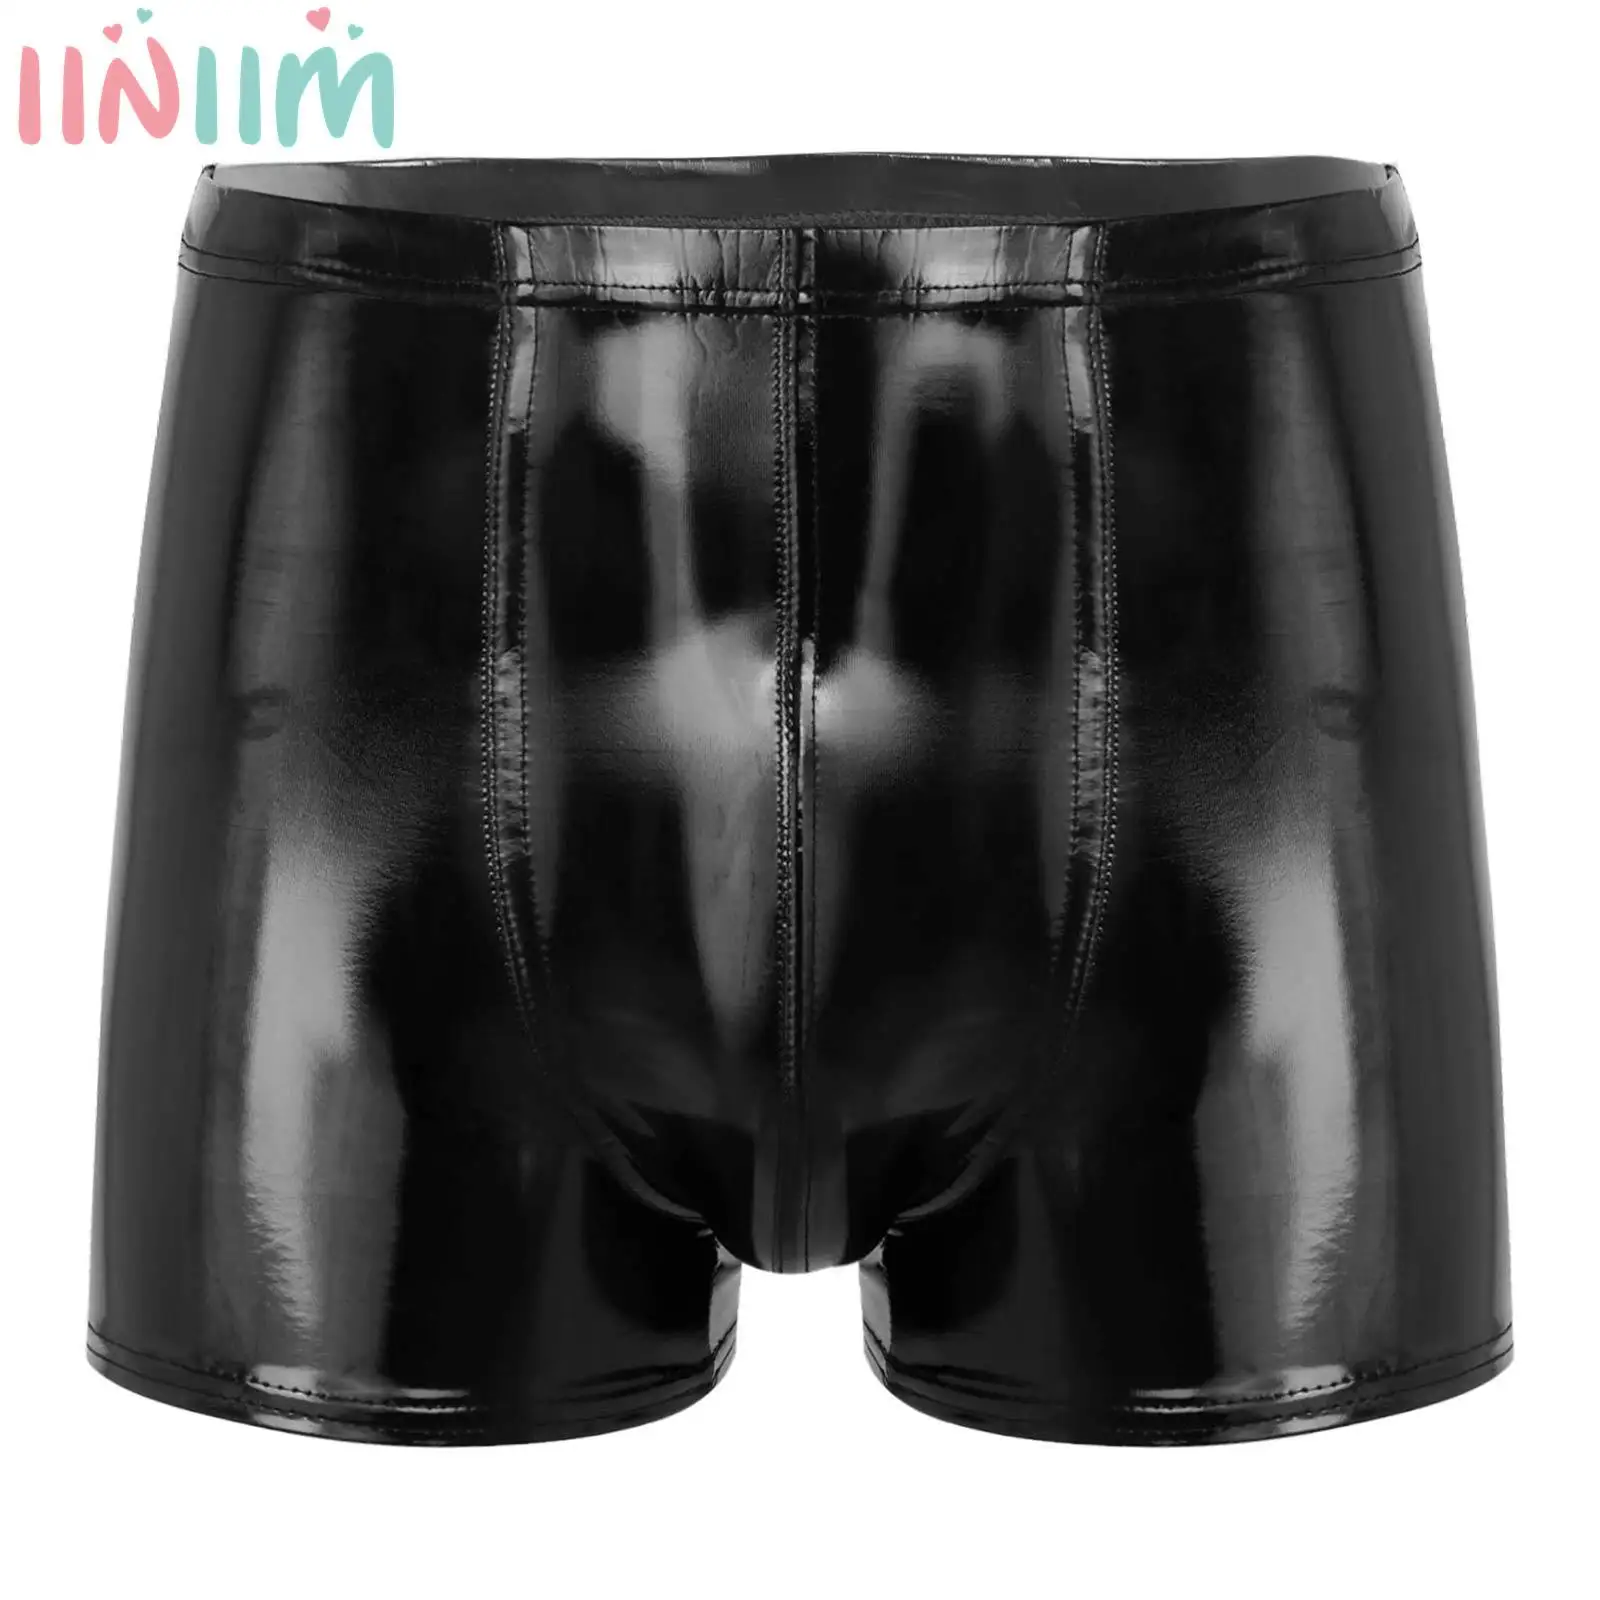 

Mens Wet Look Patent Leather Shorts Swimwear Bulge Pouch Boxer Briefs Elastic Waistband Trunks Party Skinny Hot Pants Clubwear